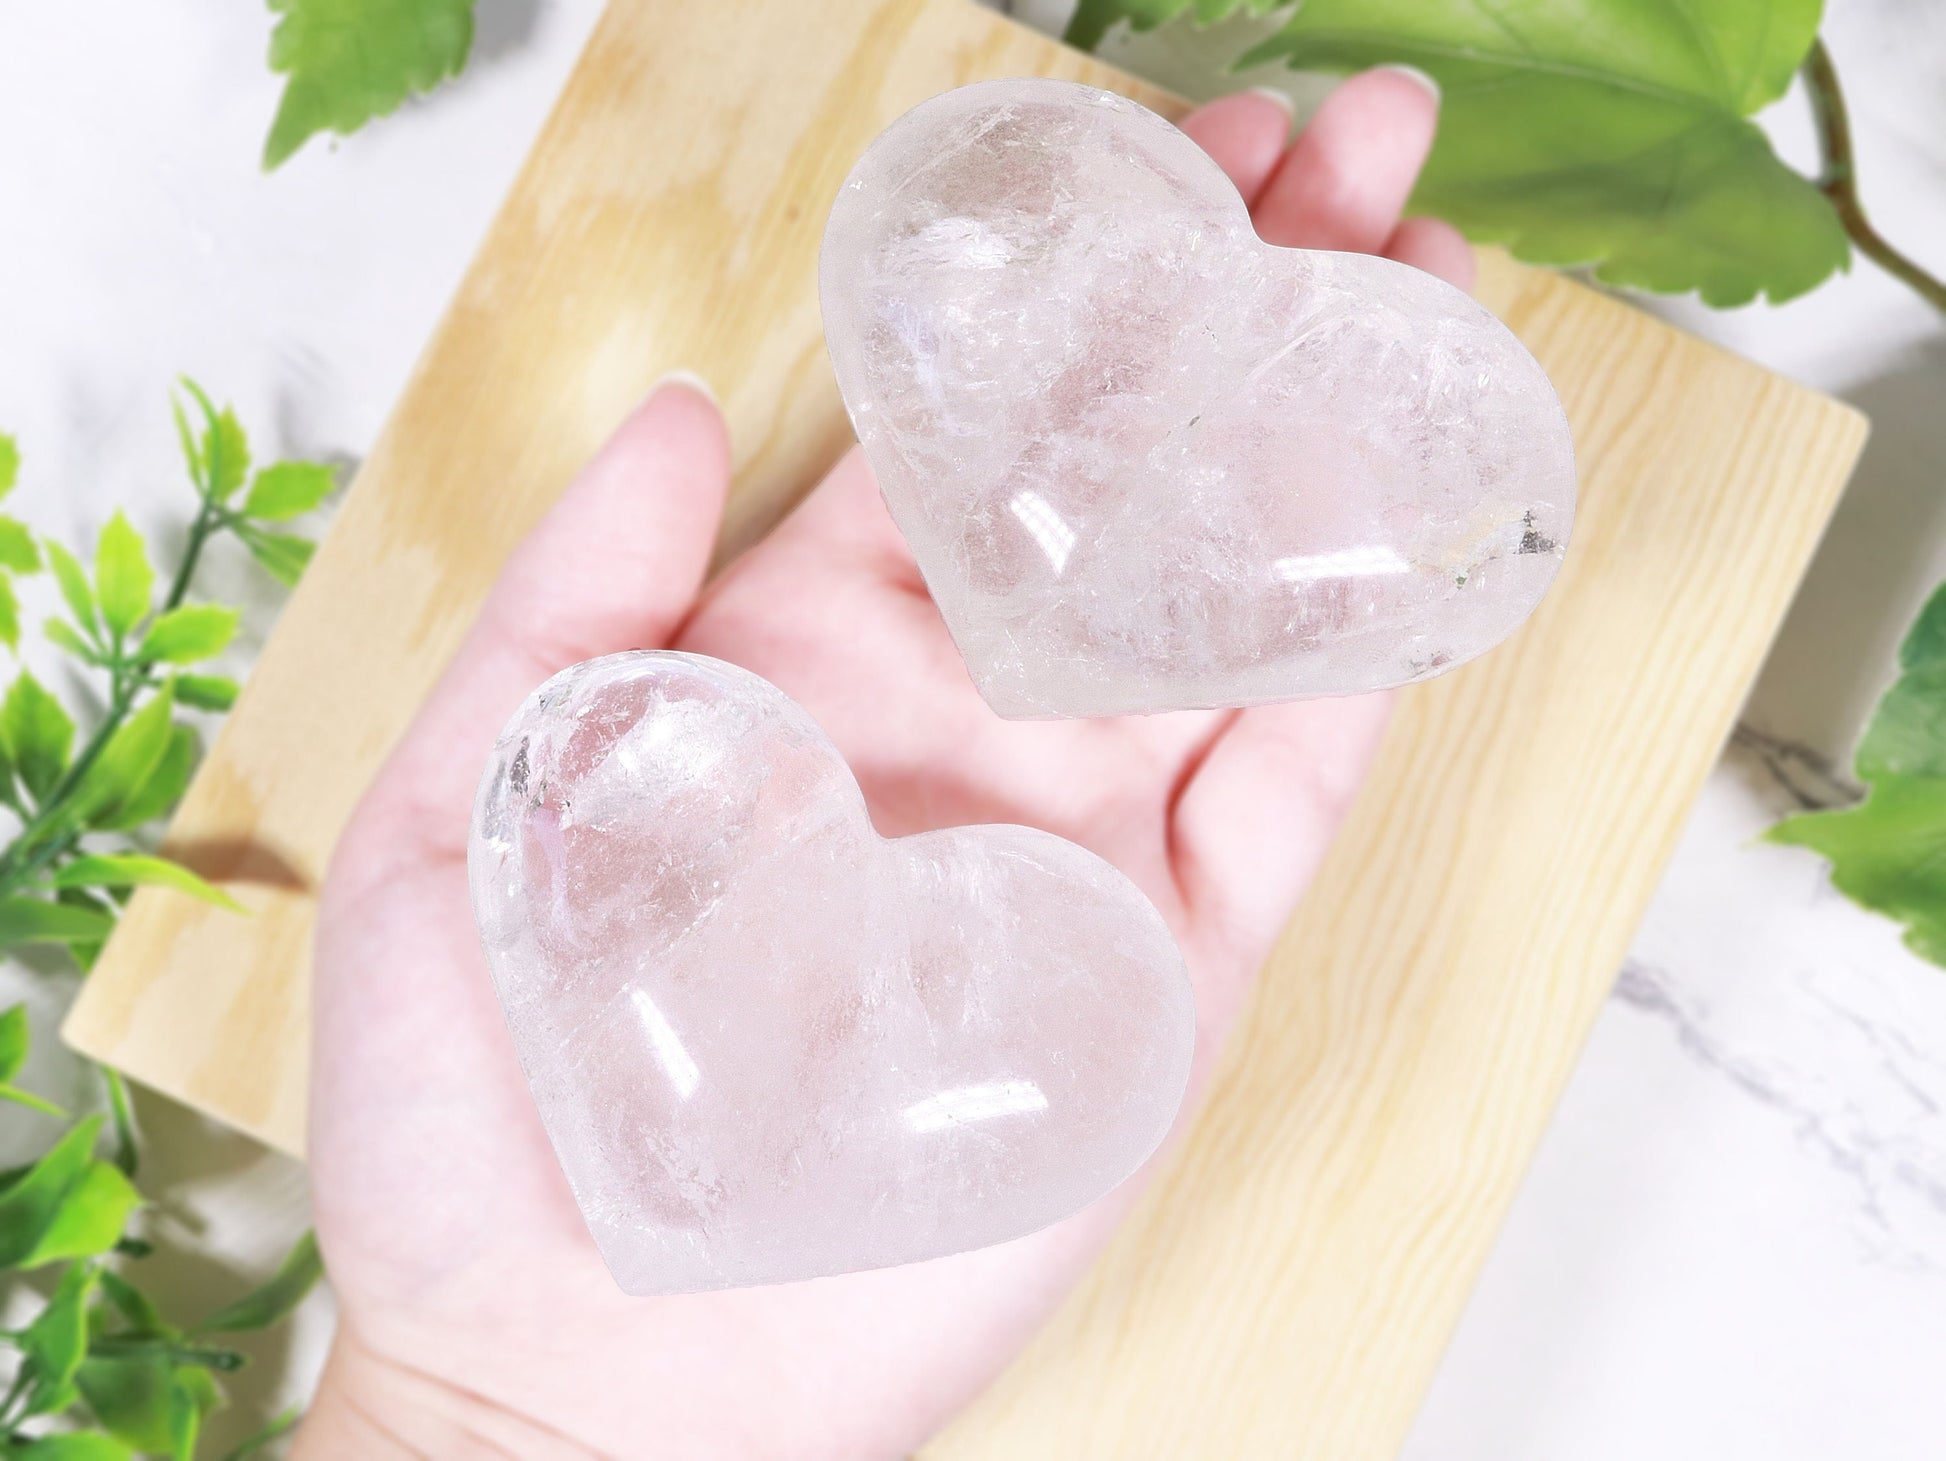 Clear Quartz Crystal Heart, Natural Polished Gemstone, Ethically Sourced